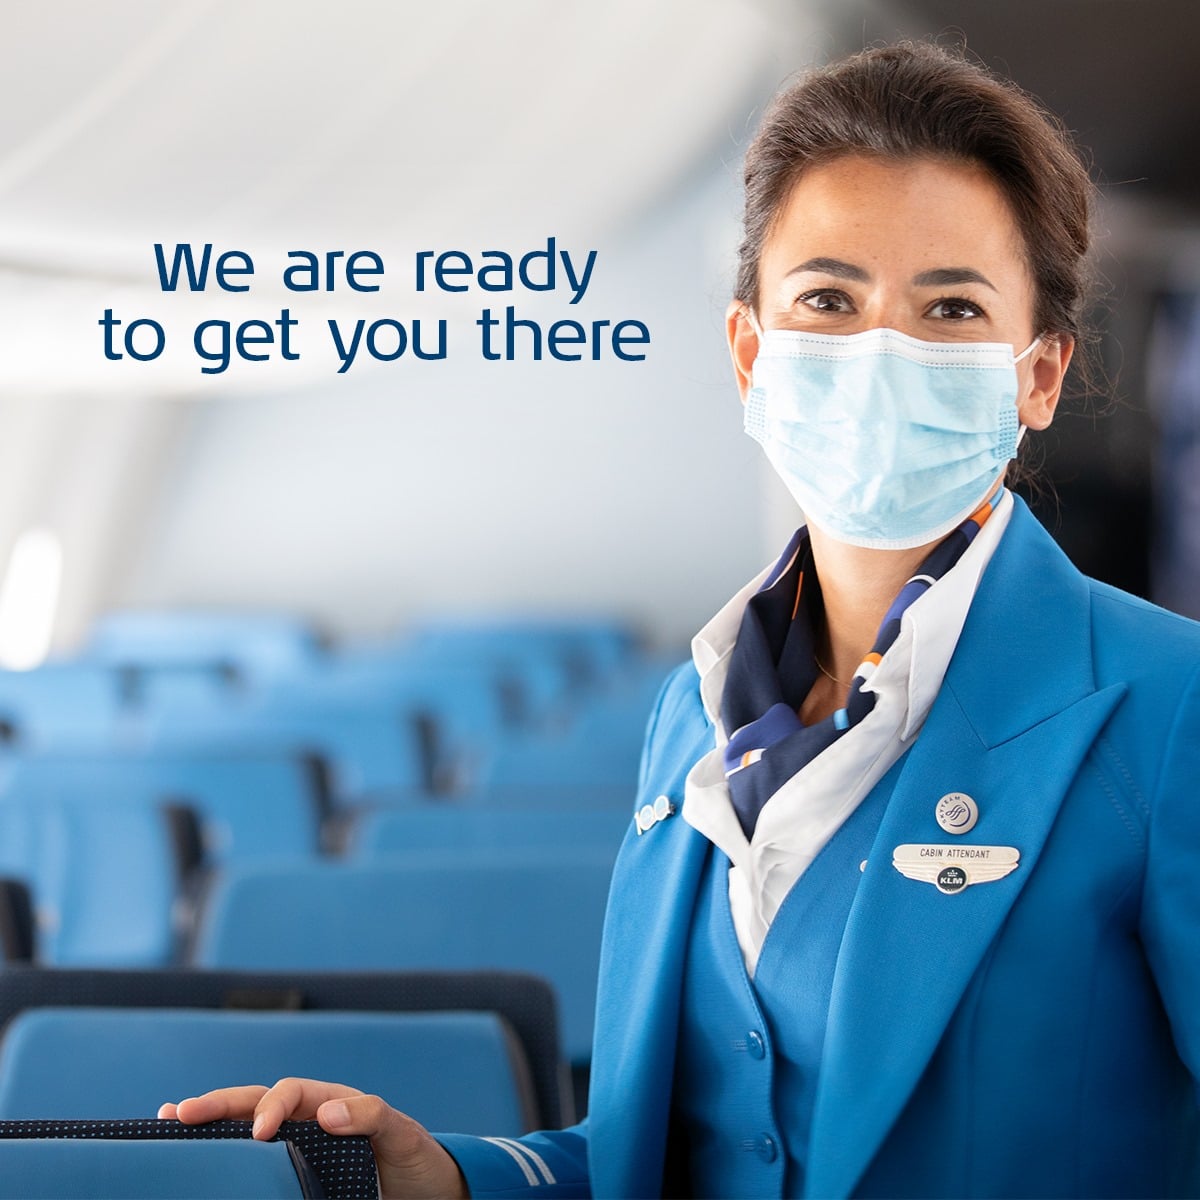 KLM requires passengers to wear face masks